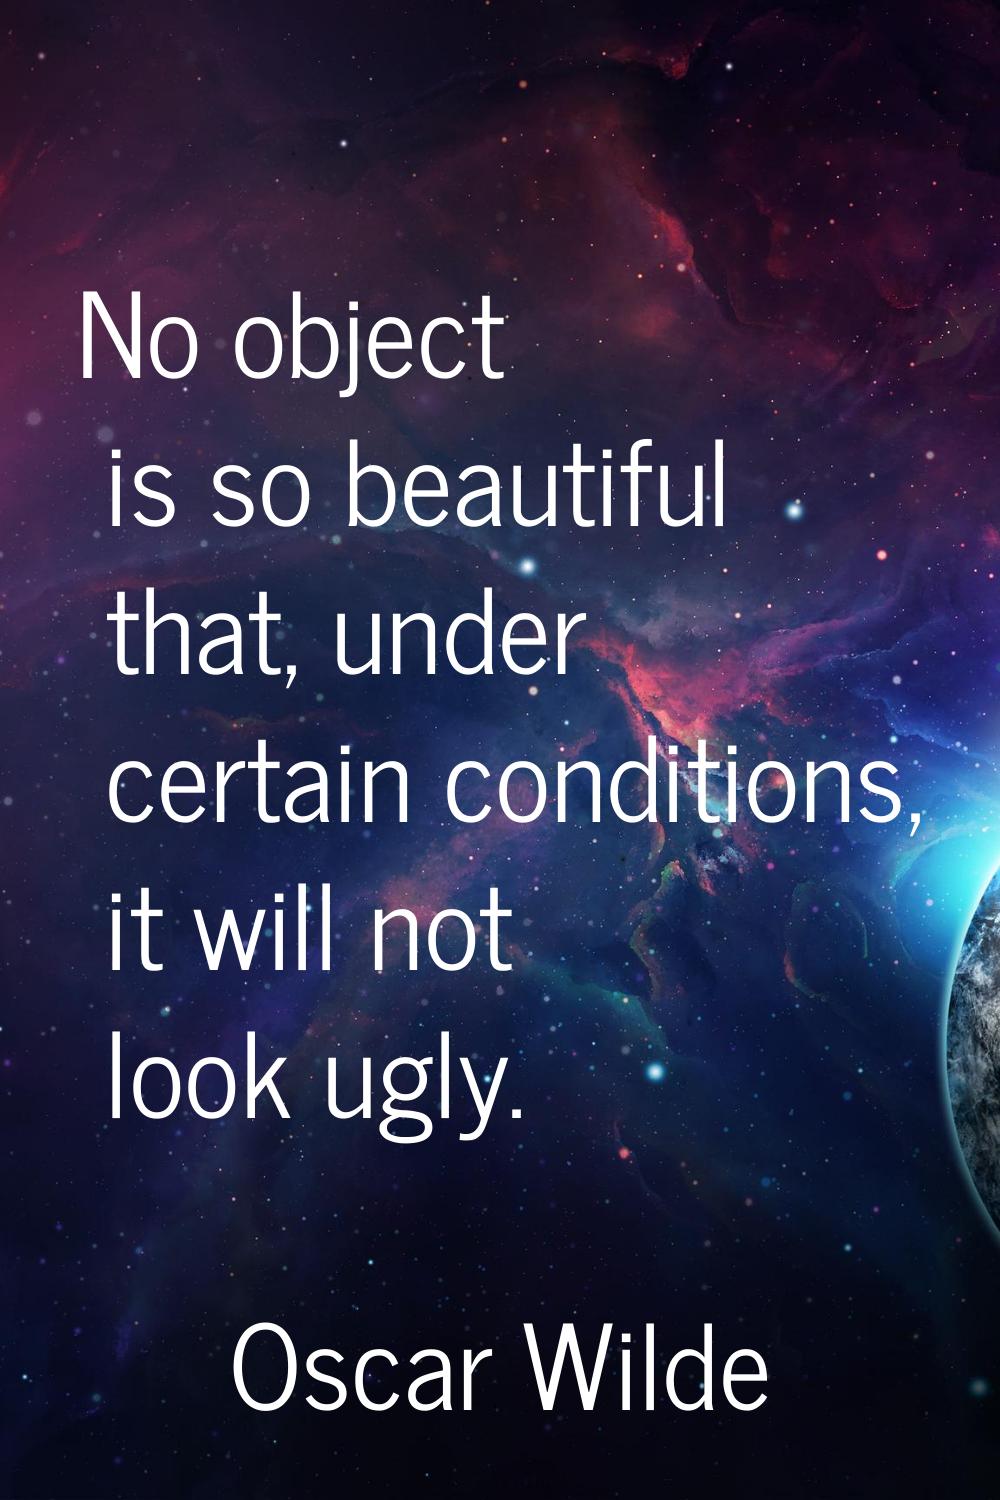 No object is so beautiful that, under certain conditions, it will not look ugly.